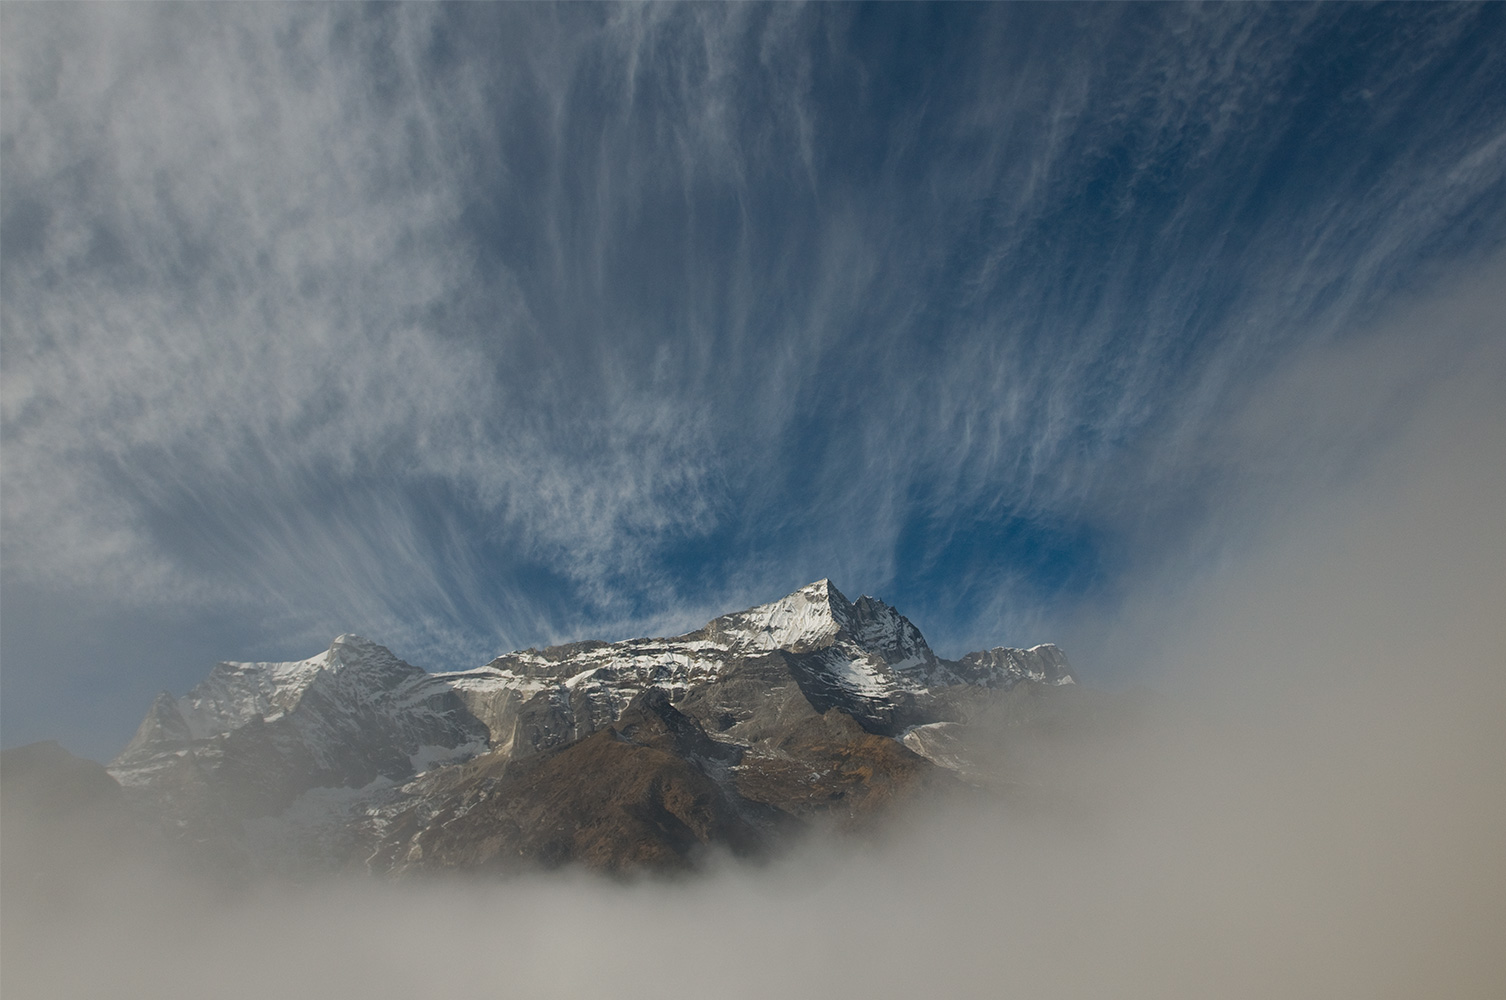 Mountains appearing through the morning mist at Khumjung vilage. December 2008